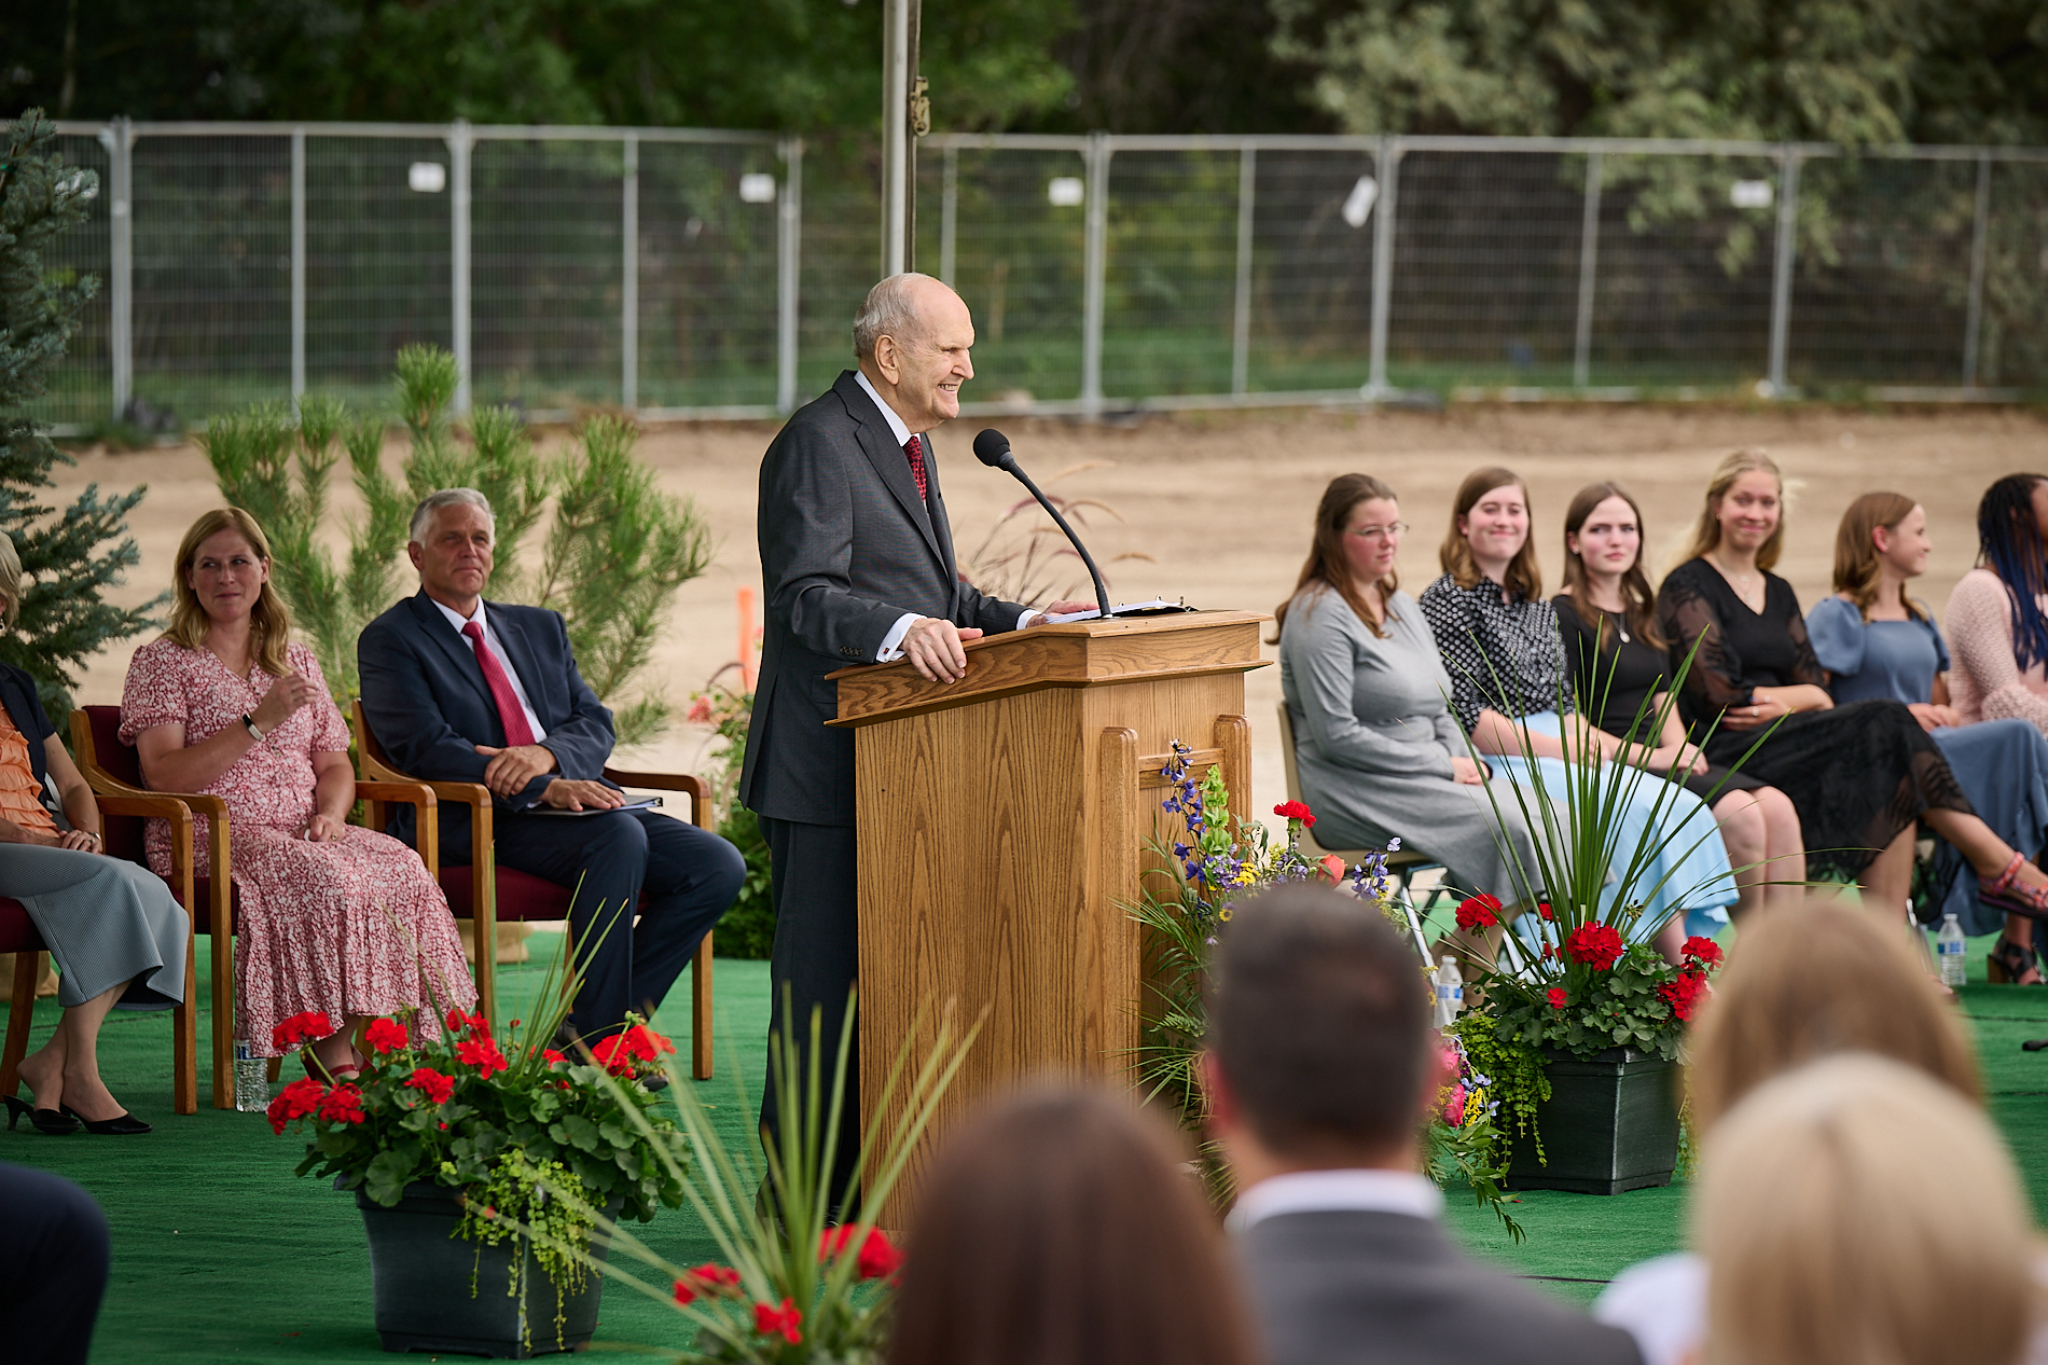 President Nelson wearing a suit and tie and speaking from a pulpit outside.